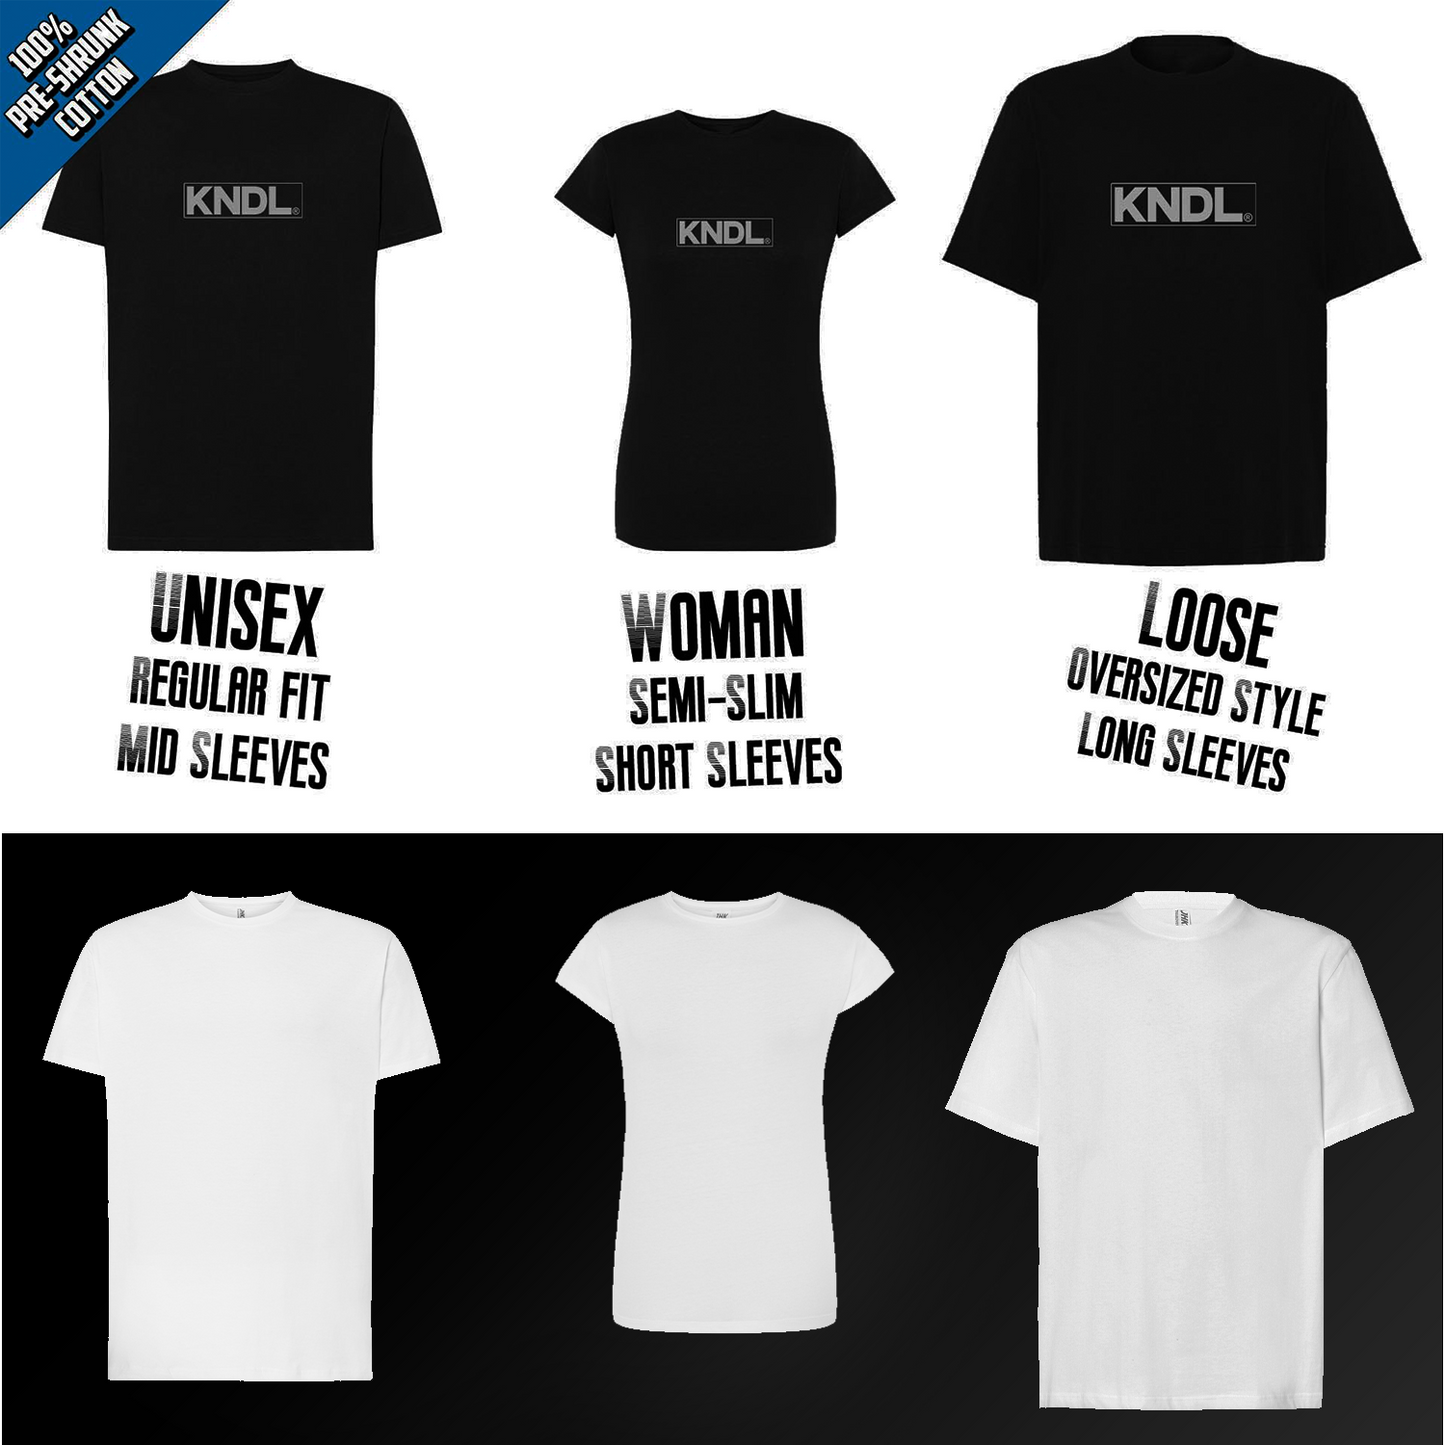 TEE NR 283 | 1 MORE SET!!! | GO TO THE F* GYM INSPIRED SHORT SLEEVE T-SHIRT FOR M/F